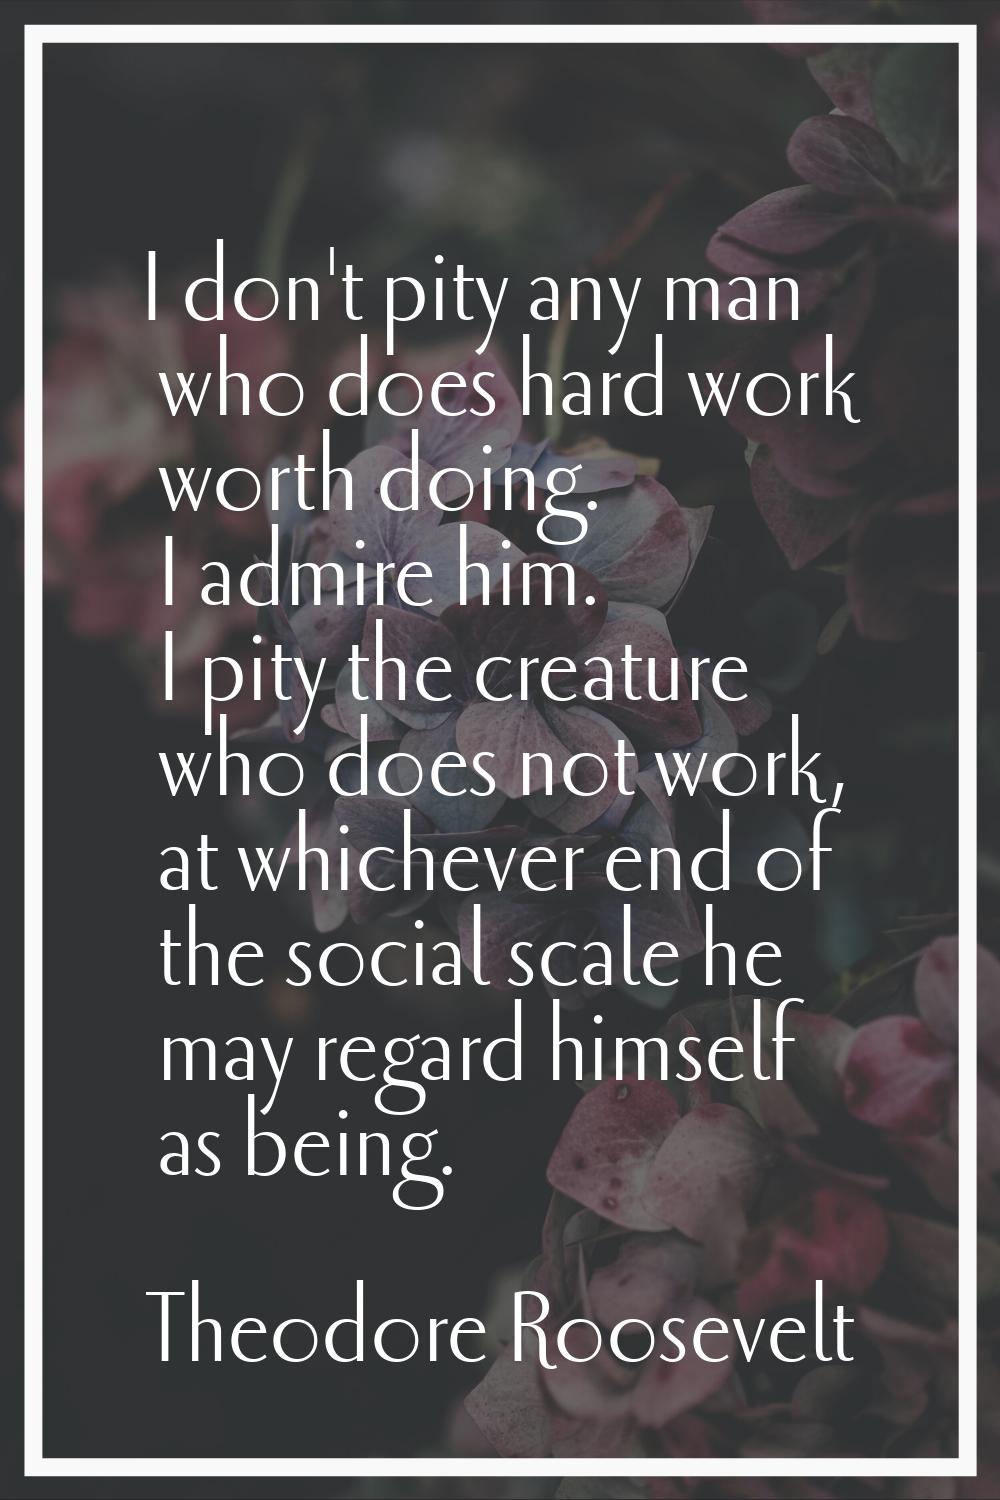 I don't pity any man who does hard work worth doing. I admire him. I pity the creature who does not